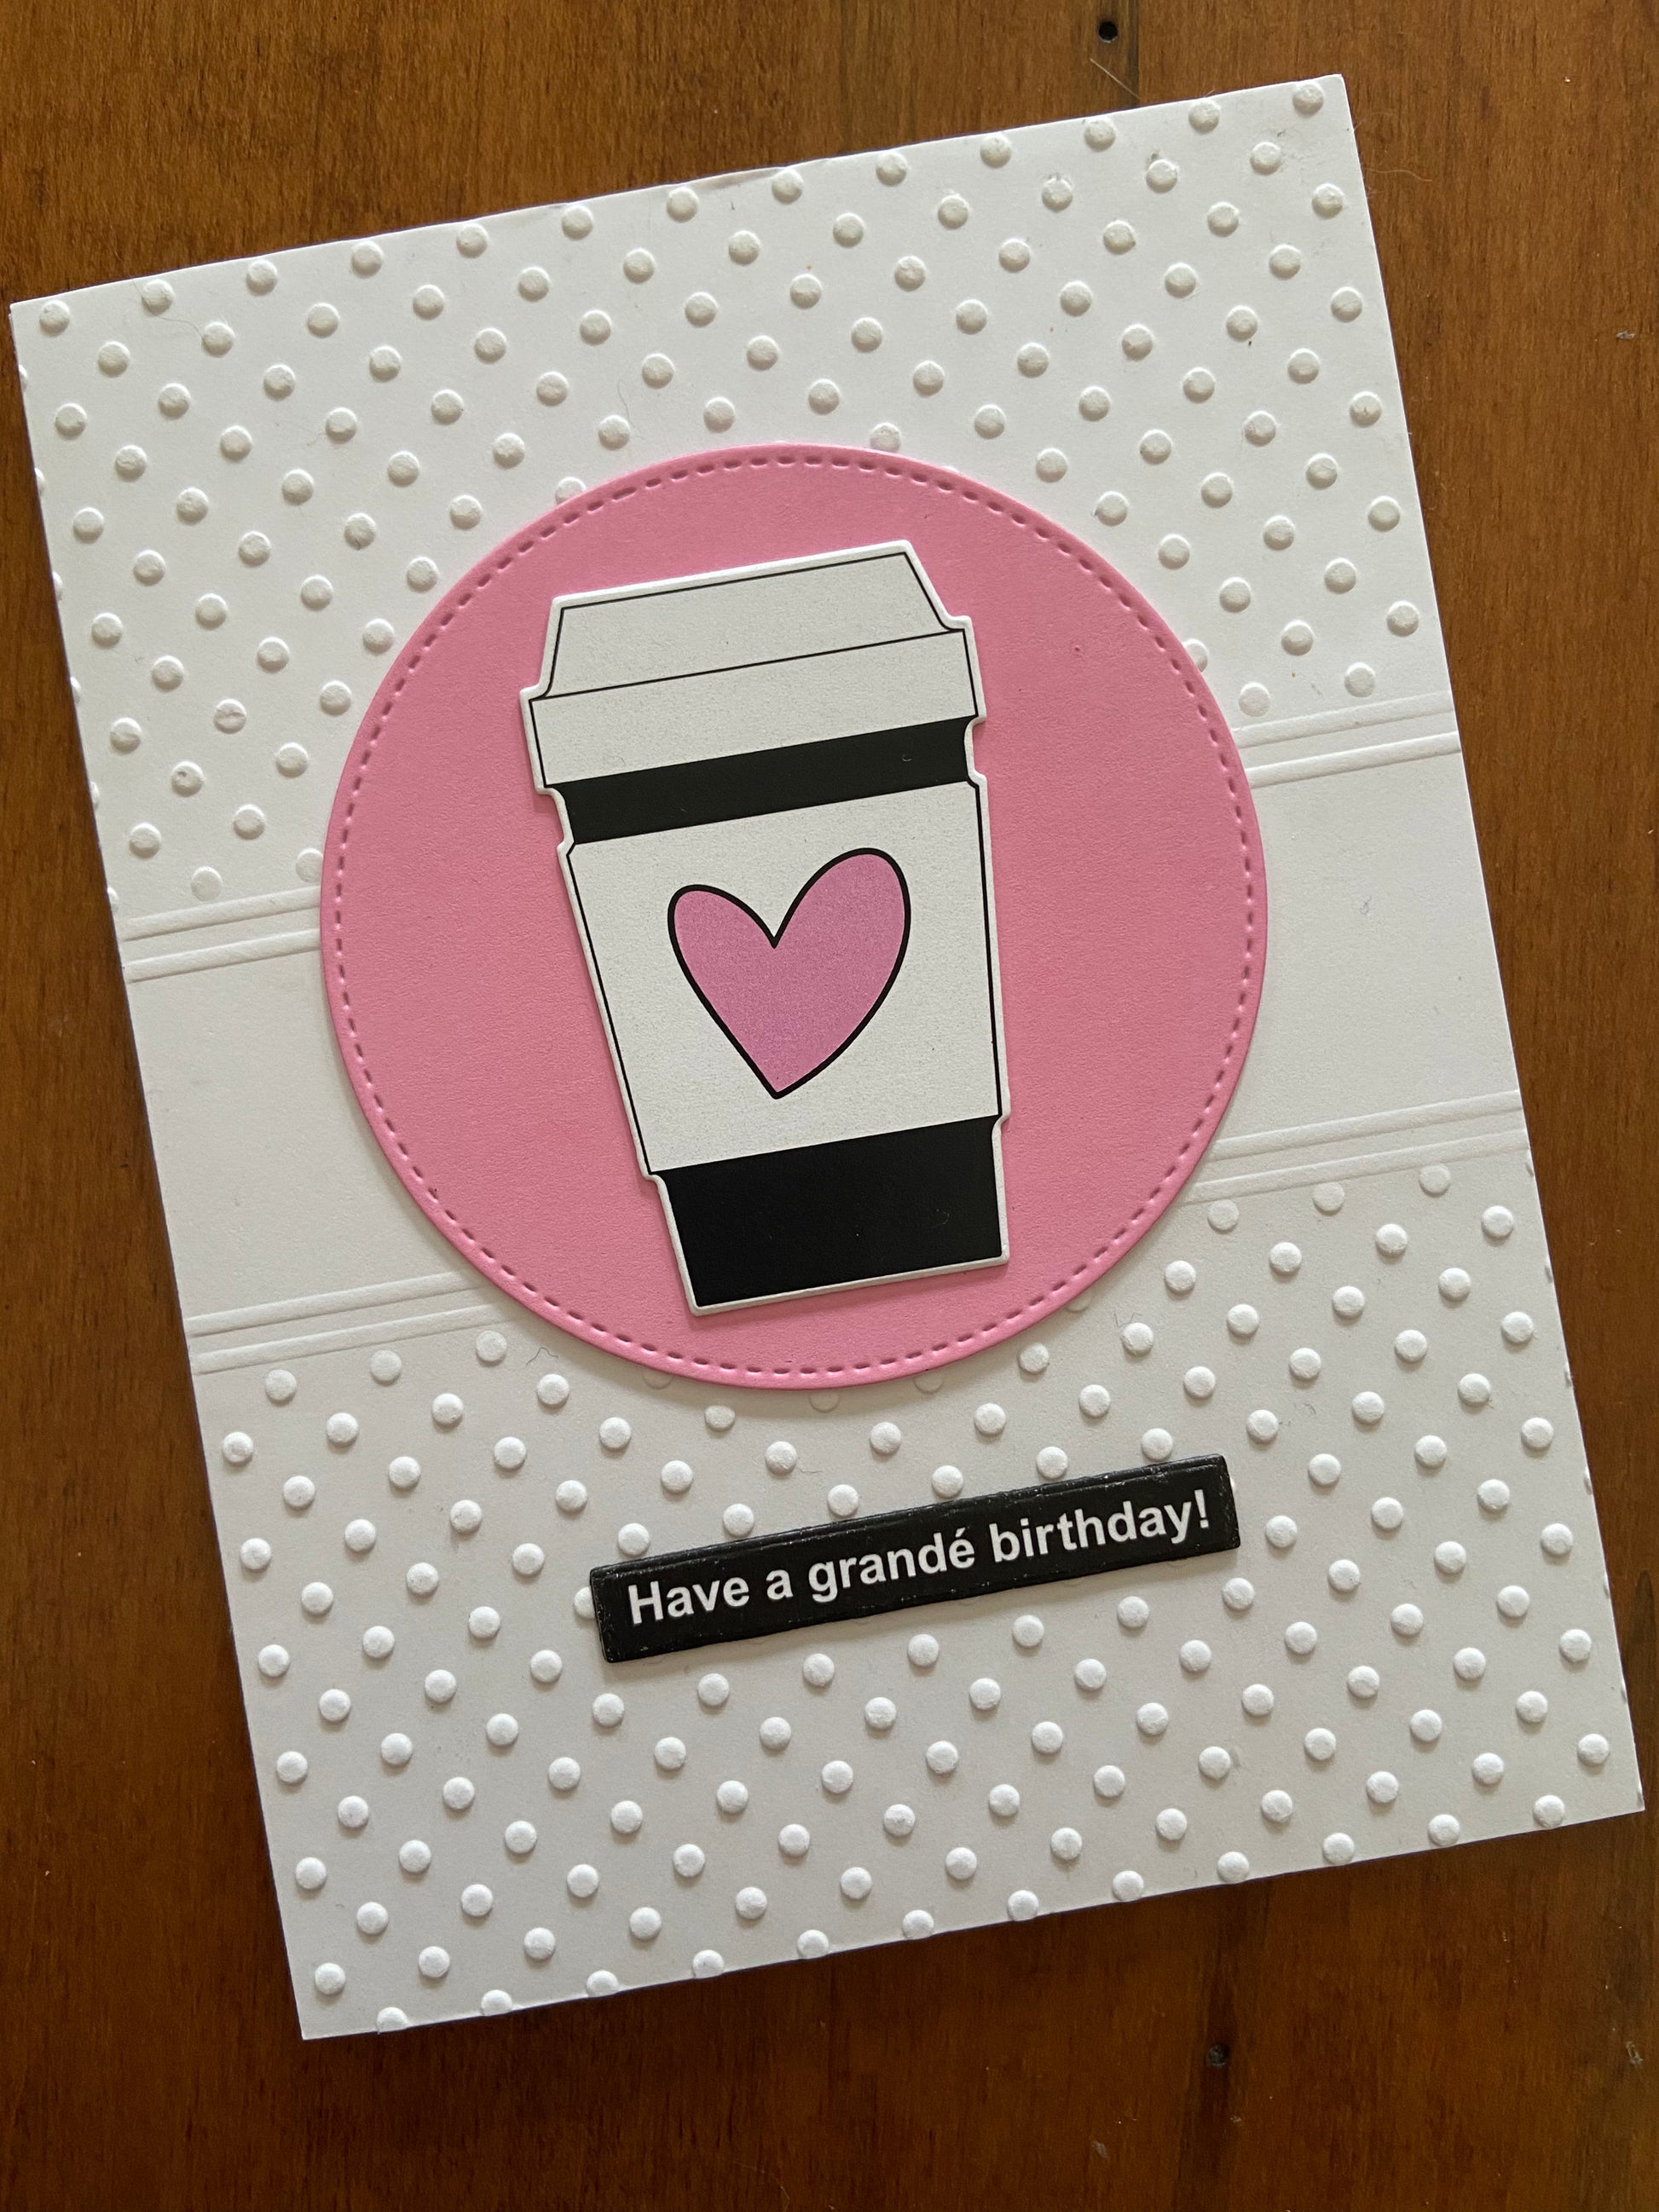 The card front is a Swiss Dot embossed background. A pink circle die cut is centred on the card with a cute little to go coffee cup adorned with a wonky pink heart. A simple black sentiment strip with white print says "Have a grandé birthday!"